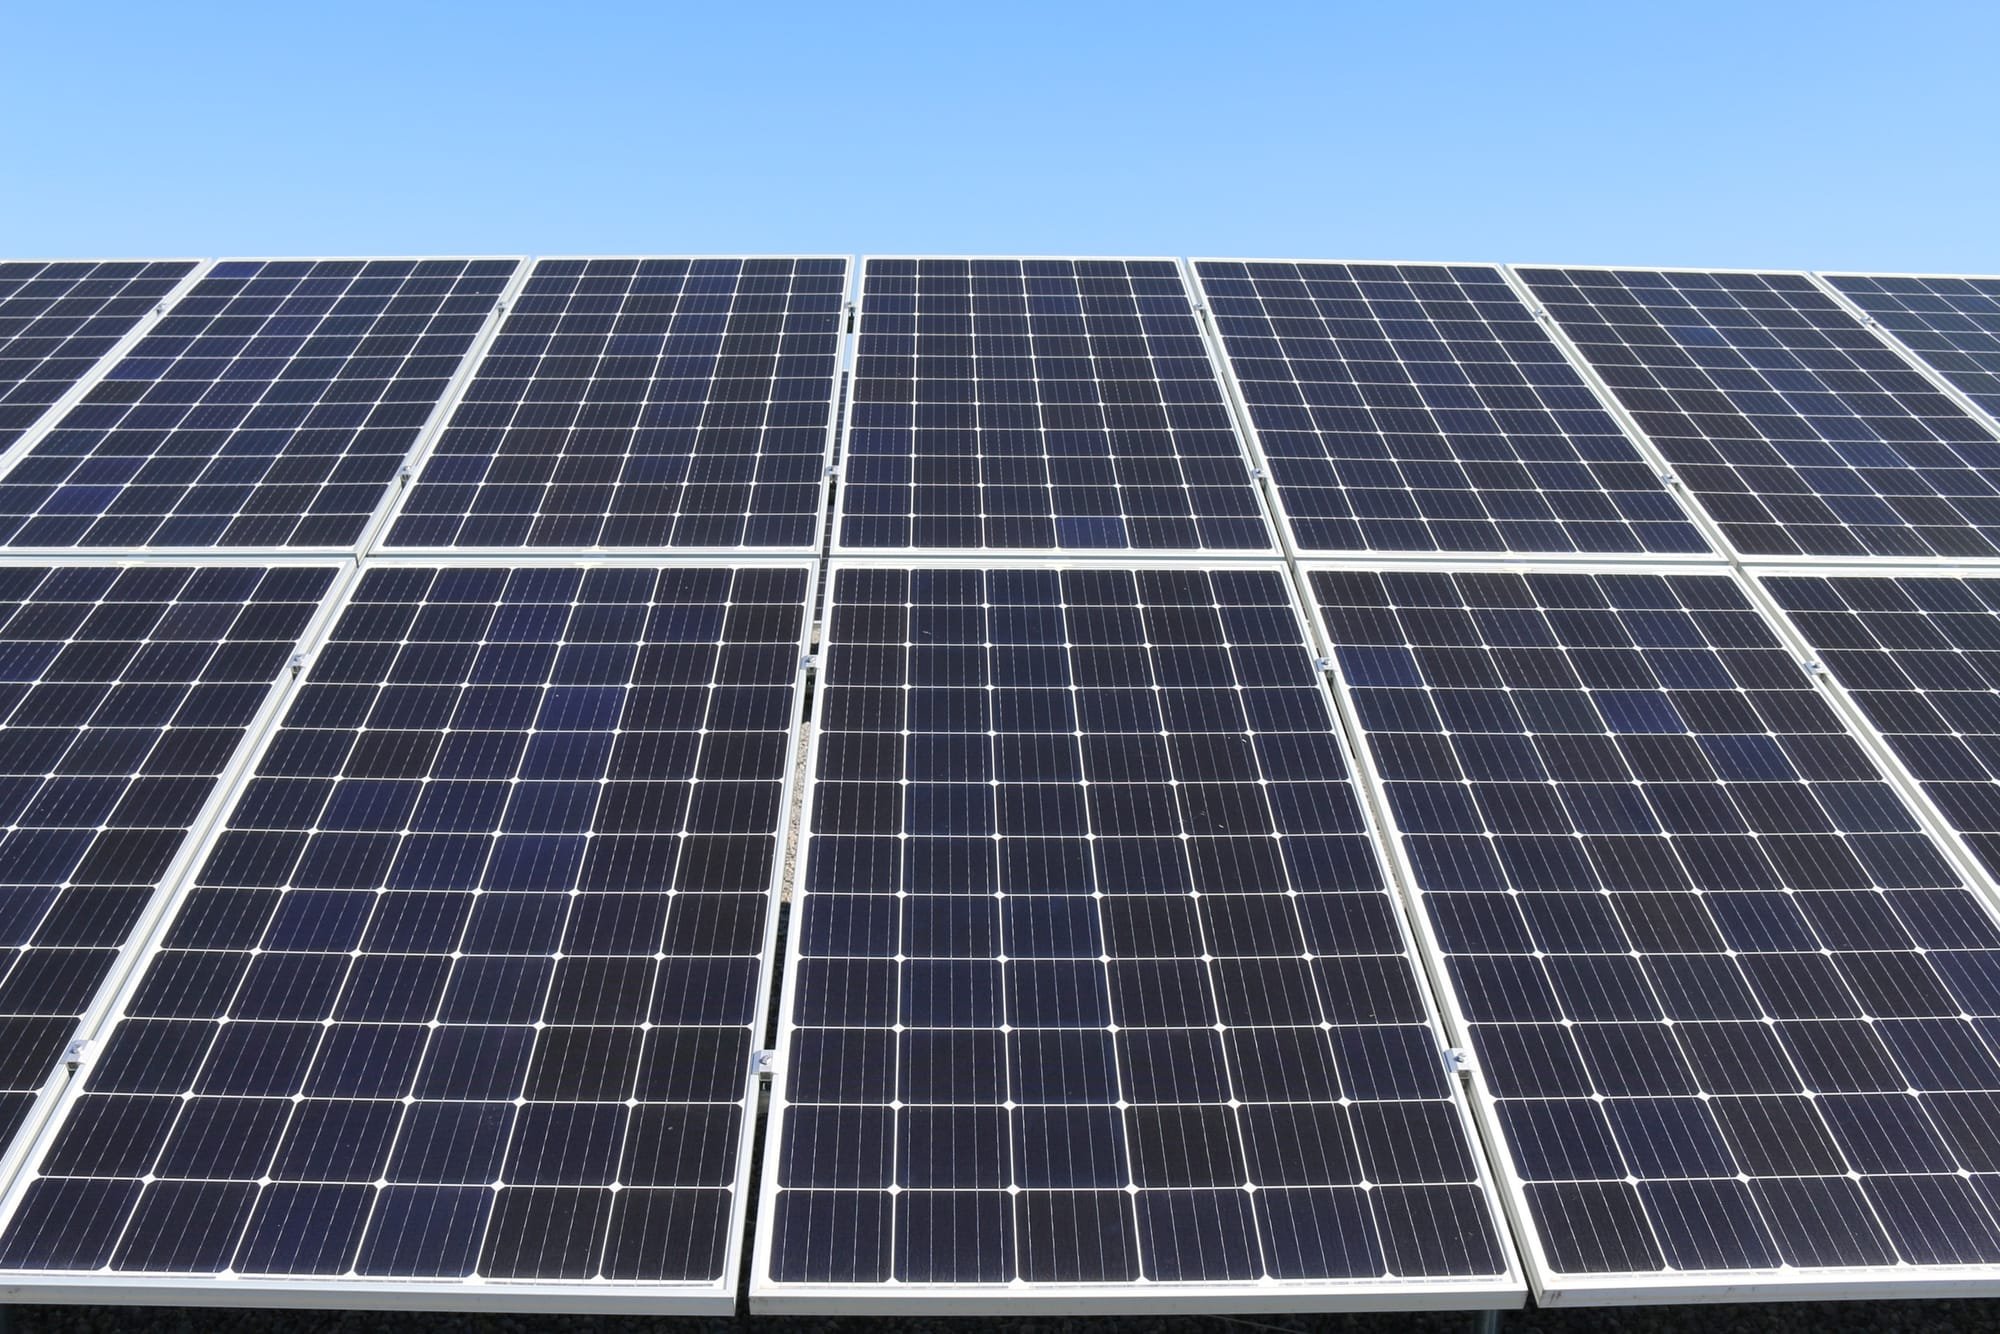 About Solar PV panels